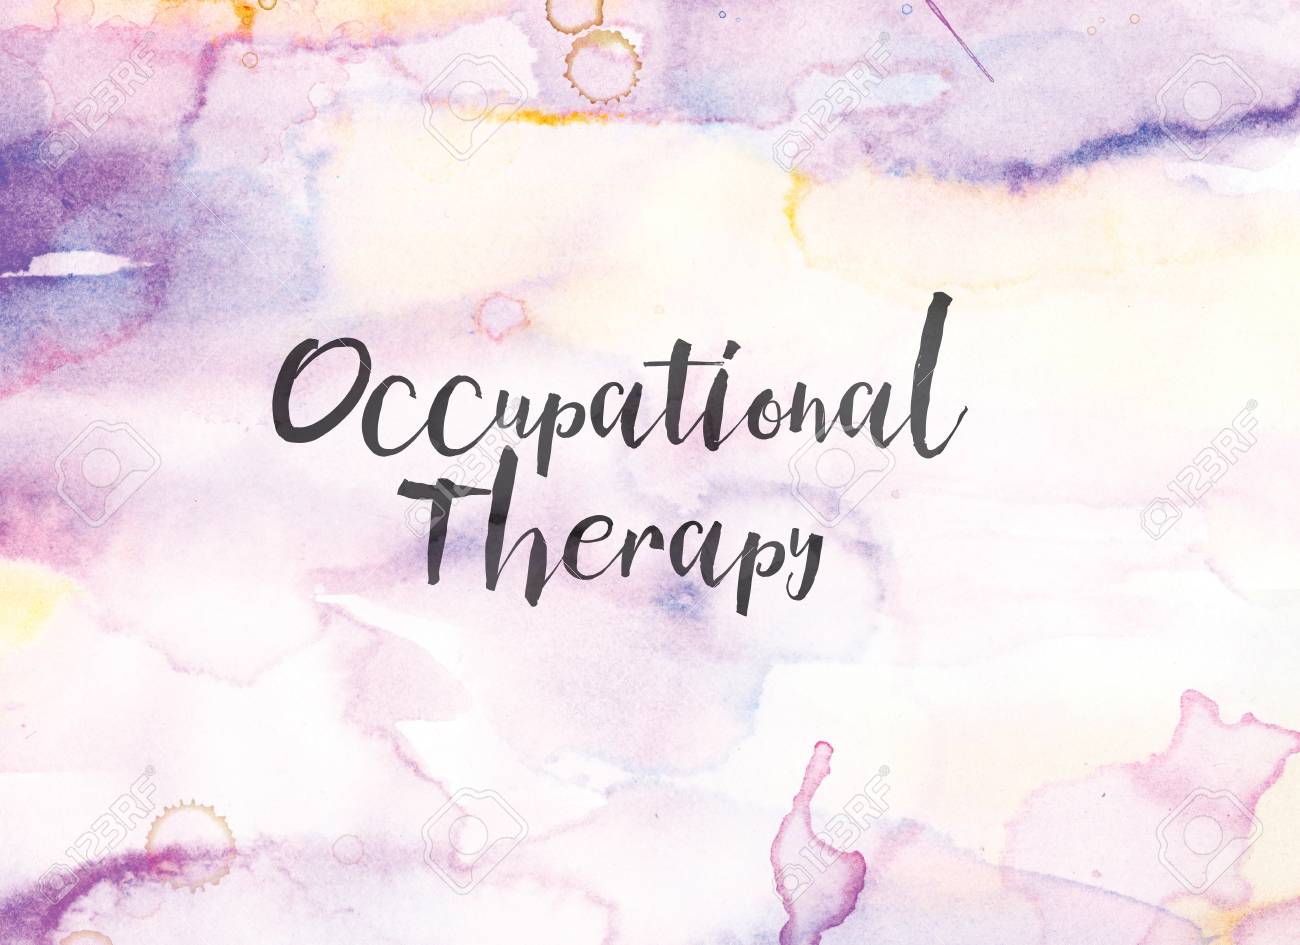 The Words Occupational Therapy Concept And Theme Written In Black